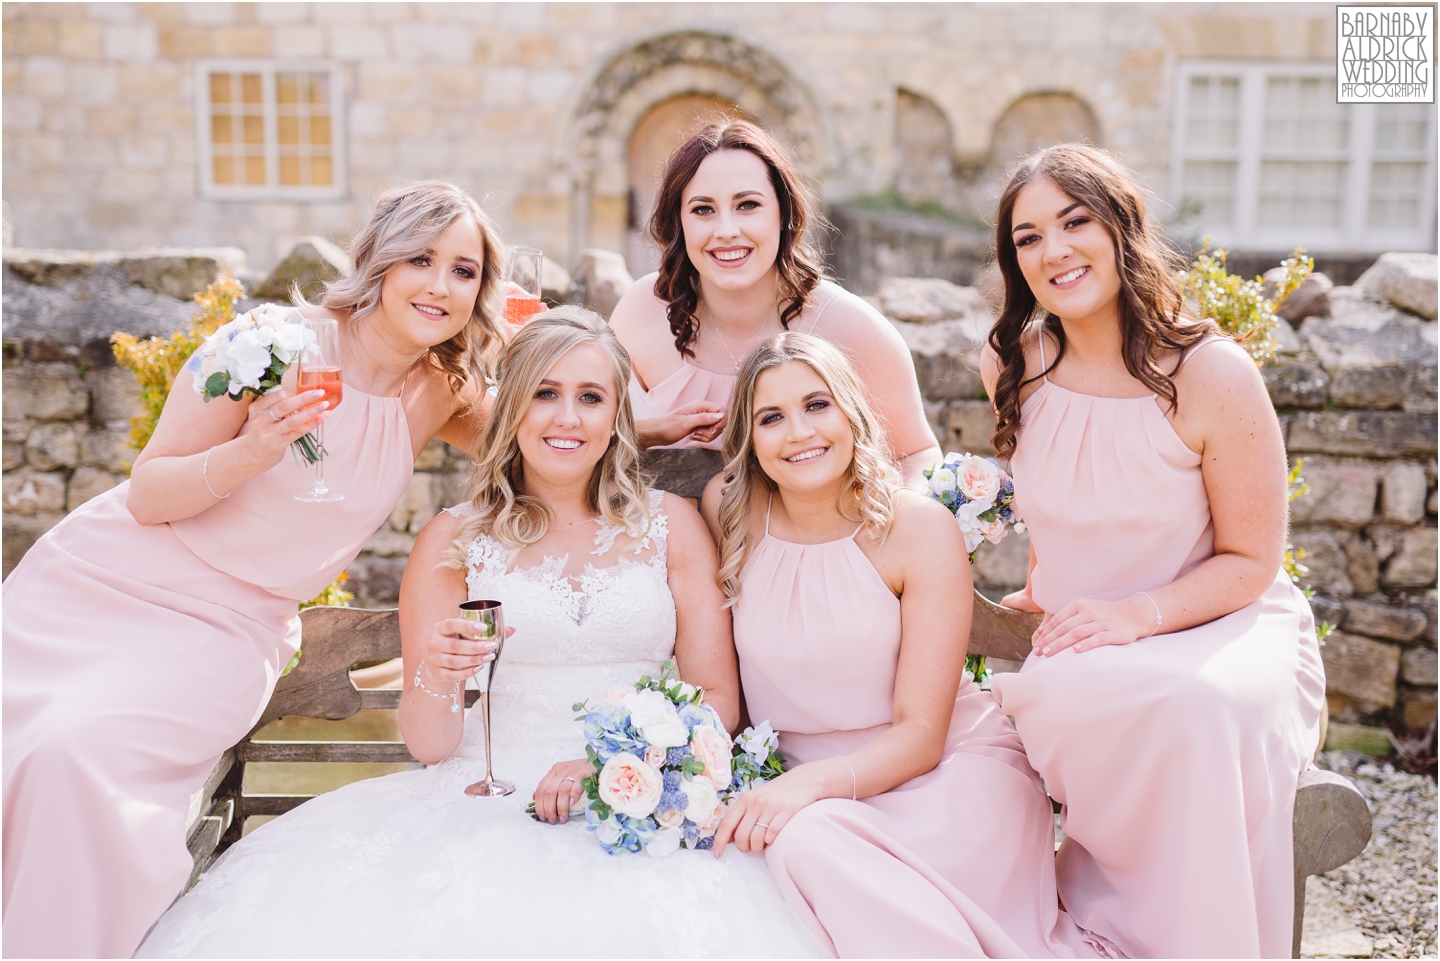 Bridesmaids group photo at Priory Cottages, Priory Cottages Wedding, Syningthwaite Priory photos